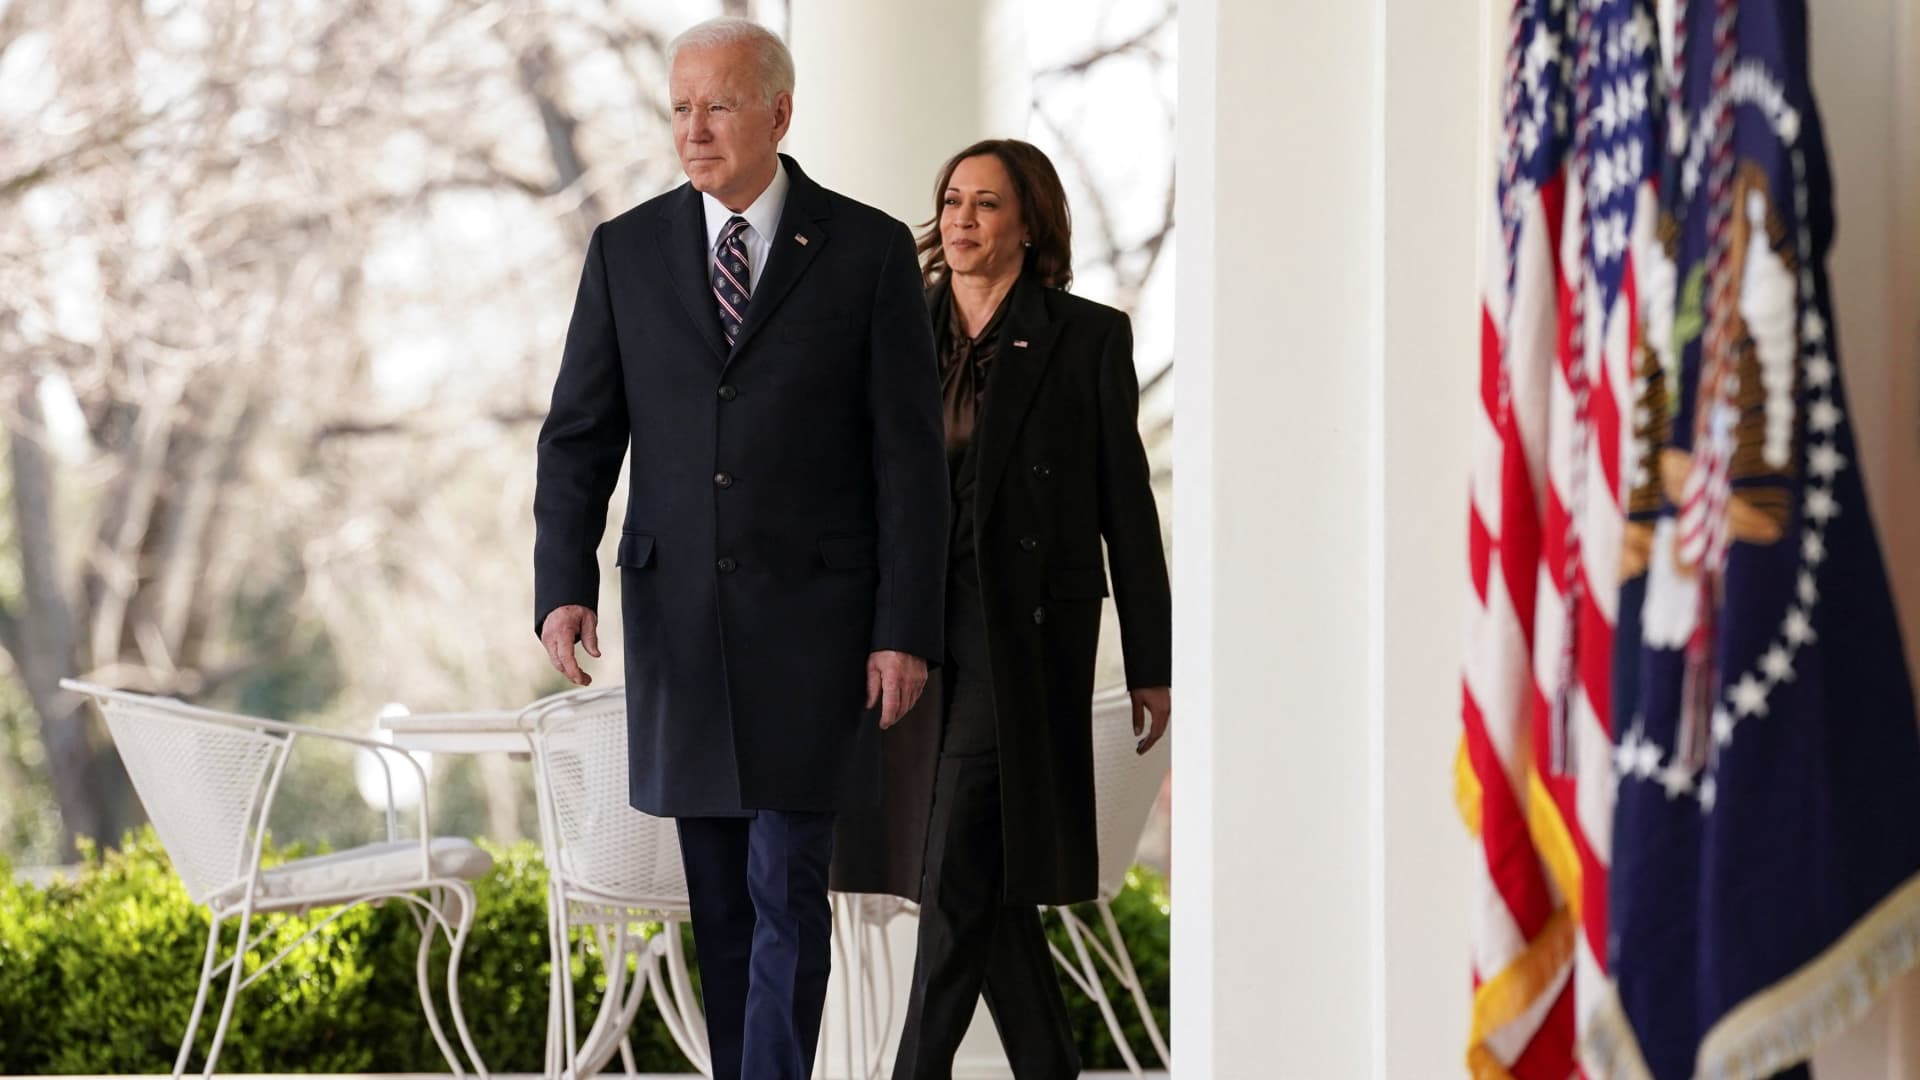 Harris, Newsom engage with donors as possible 2024 bids loom if Biden doesn't run